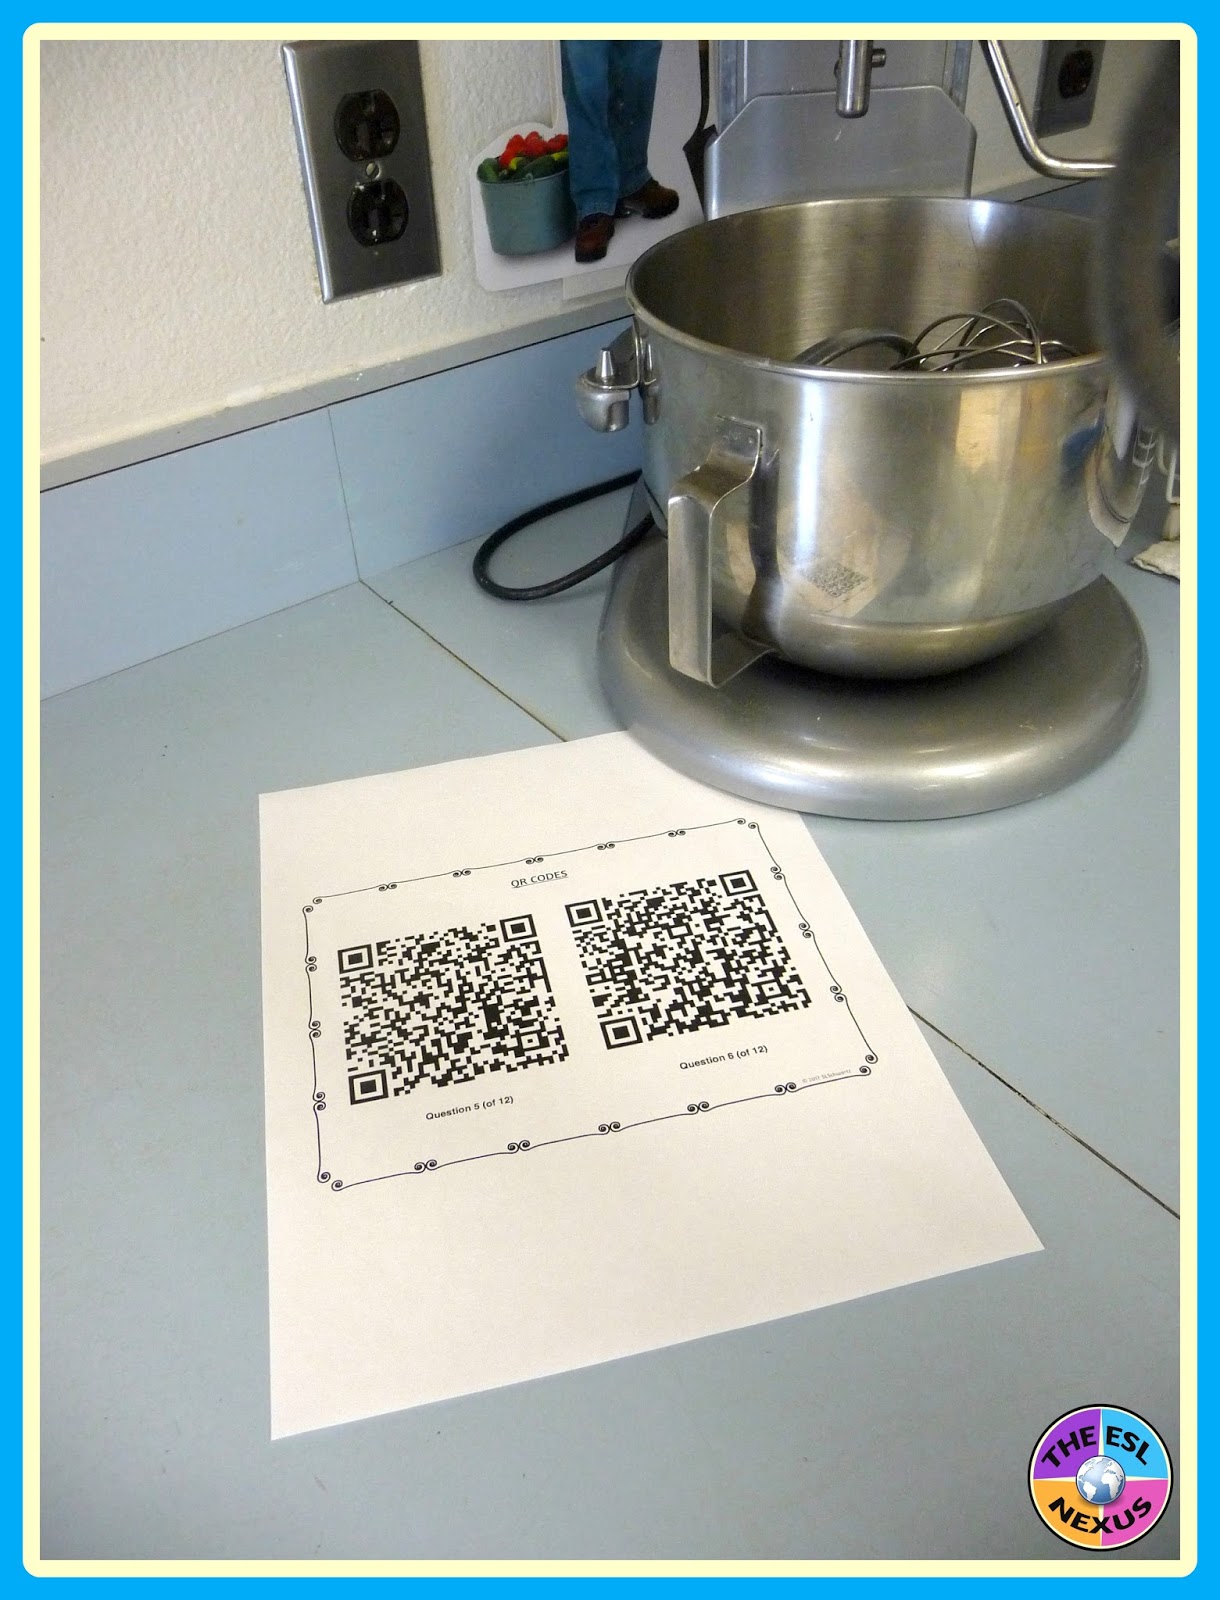 How to easily create a QR code scavenger hunt & lessons learned after implementing one for the first time | The ESL Connection